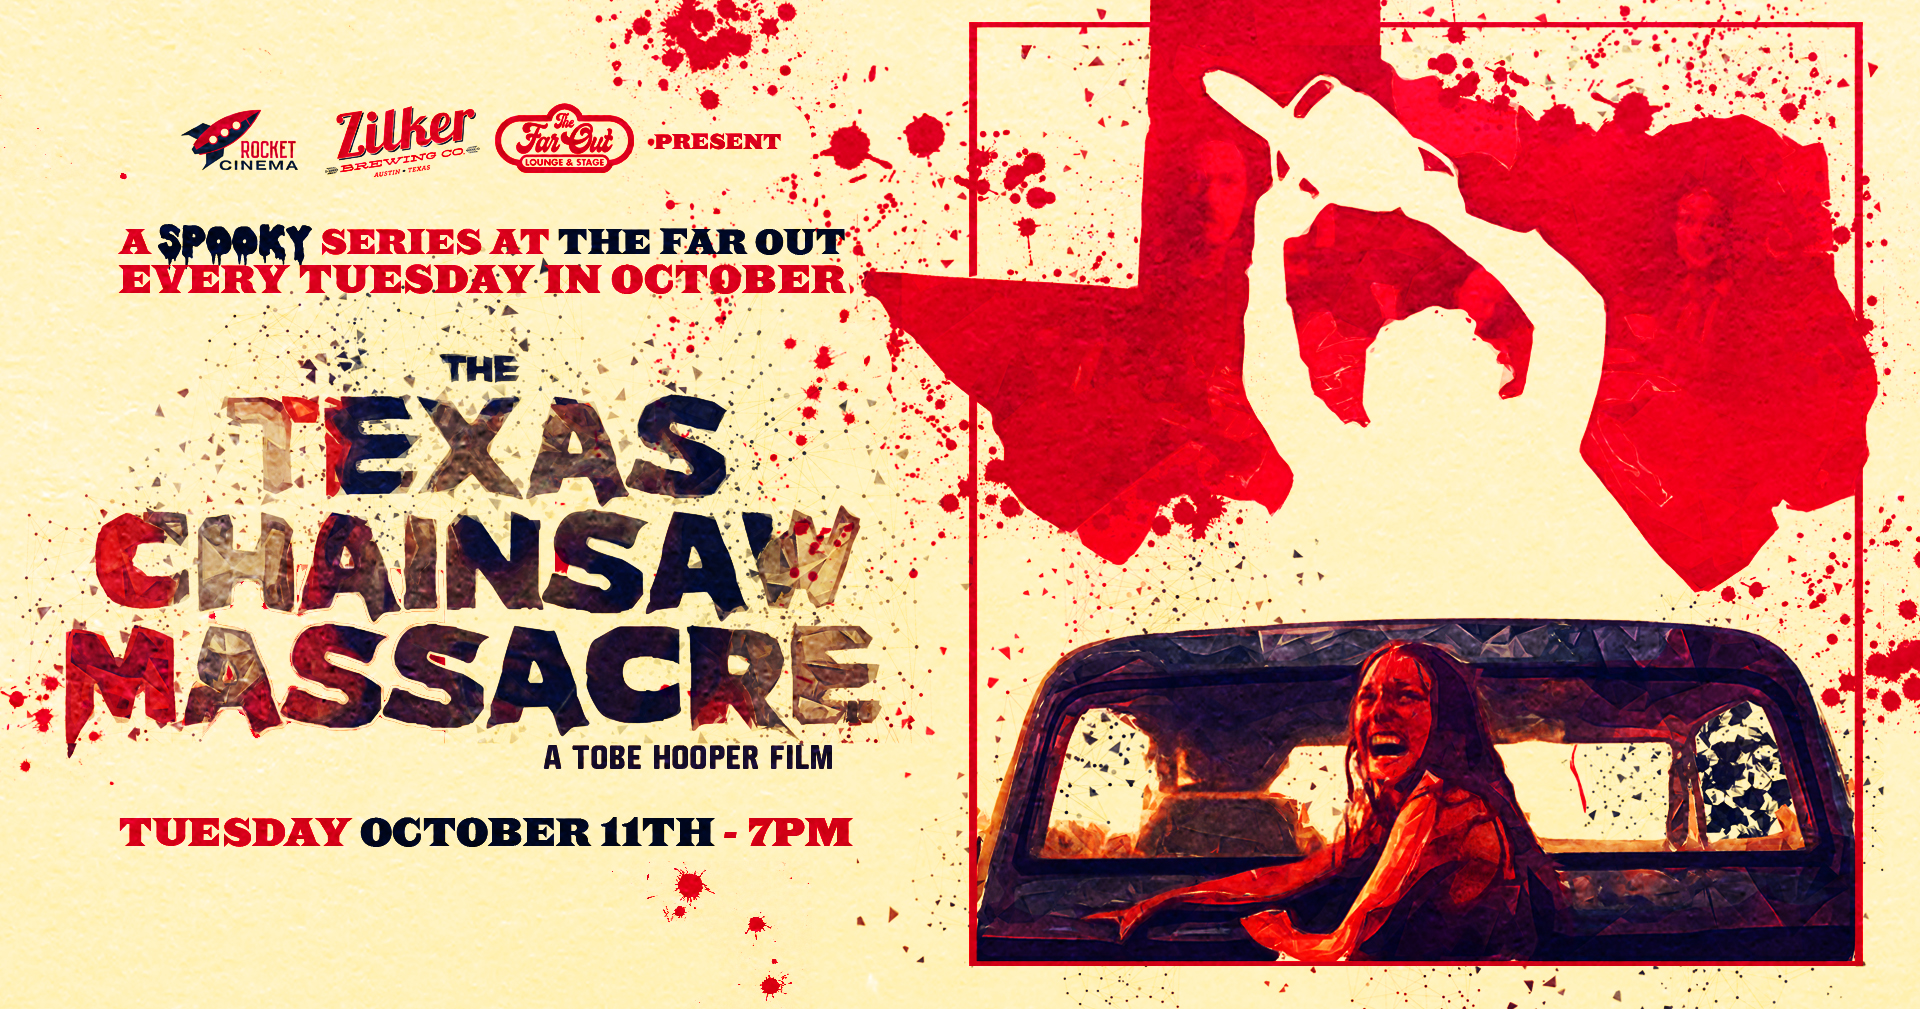 A Spooky Series at The Far Out- THE TEXAS CHAINSAW MASSACRE